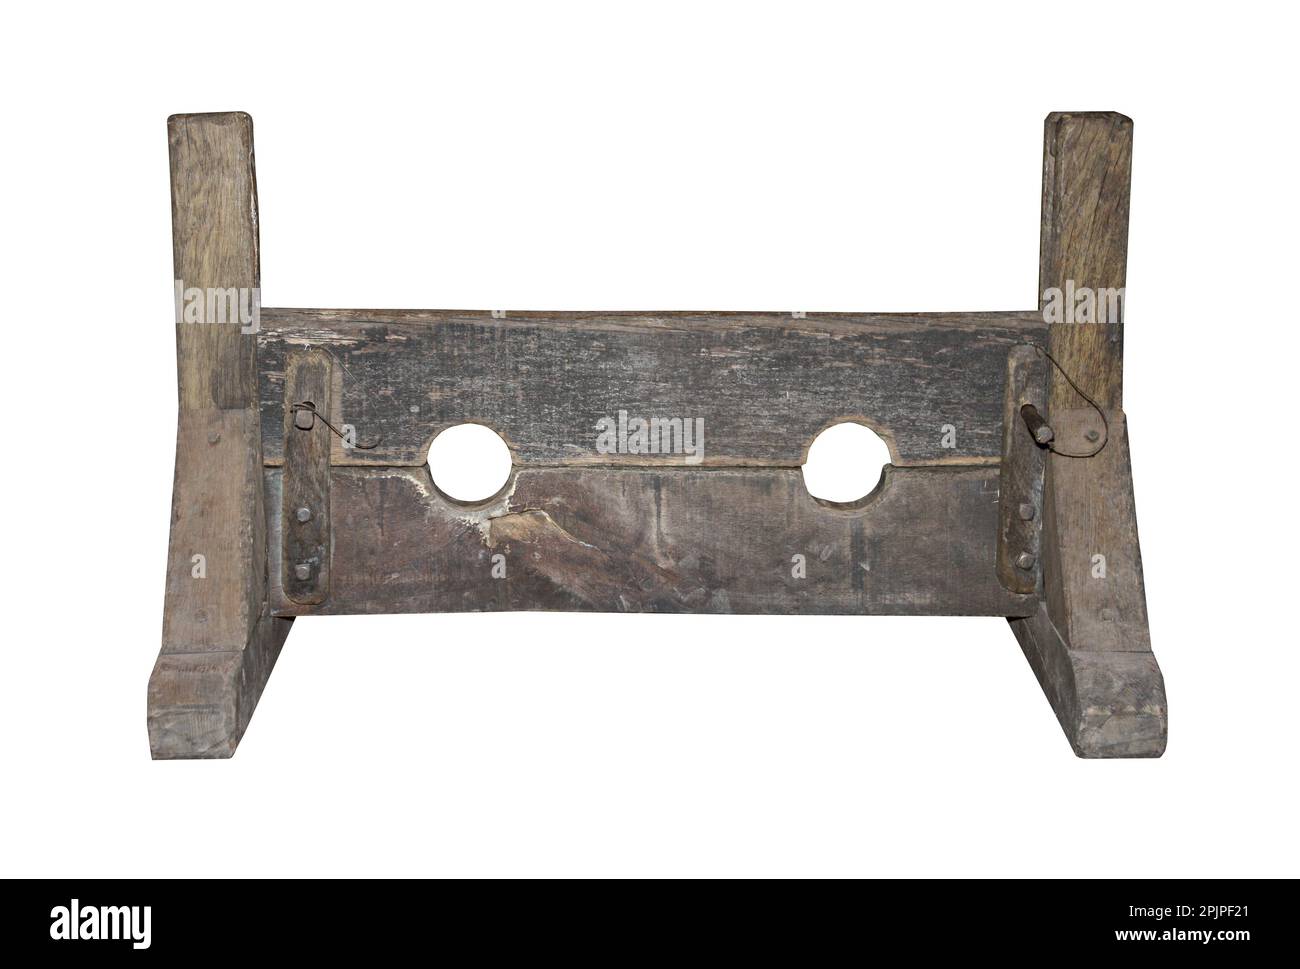 A Wooden Set of Medieval Punishment Stocks. Stock Photo